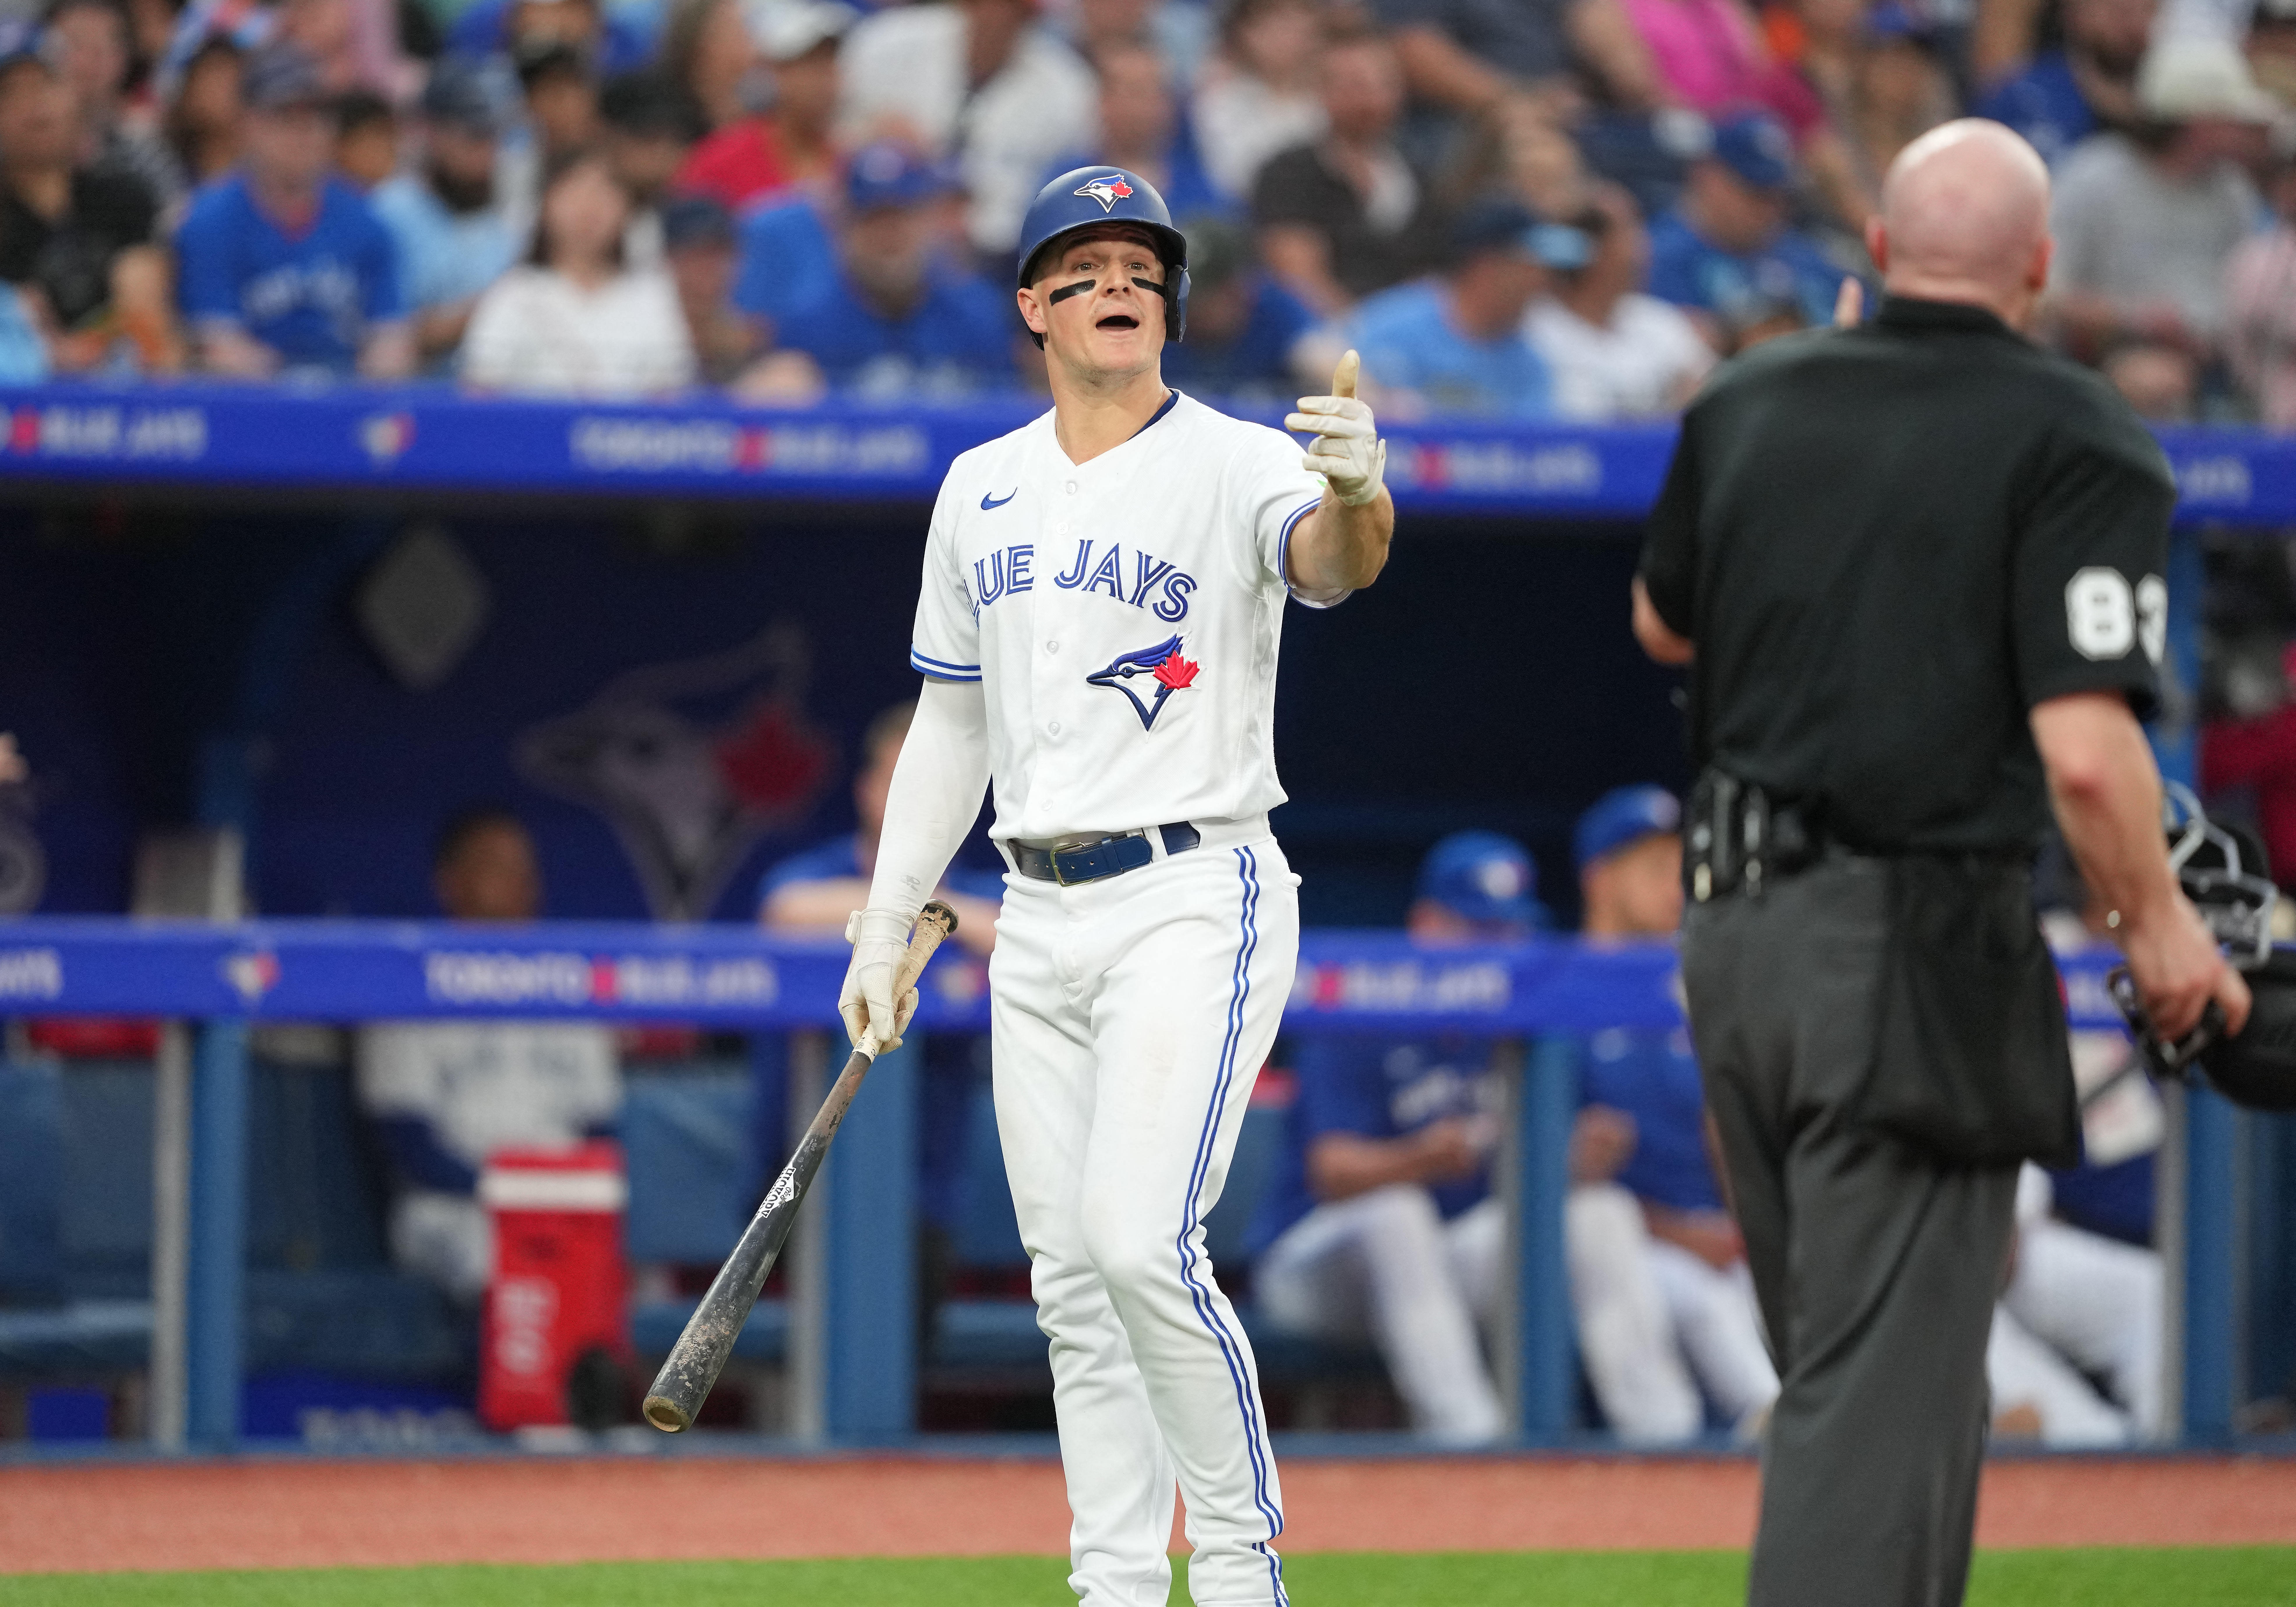 Kirk hits 2 home runs, Espinal also homers as Blue Jays control Ohtani,  beat Angels 6-1 - The San Diego Union-Tribune